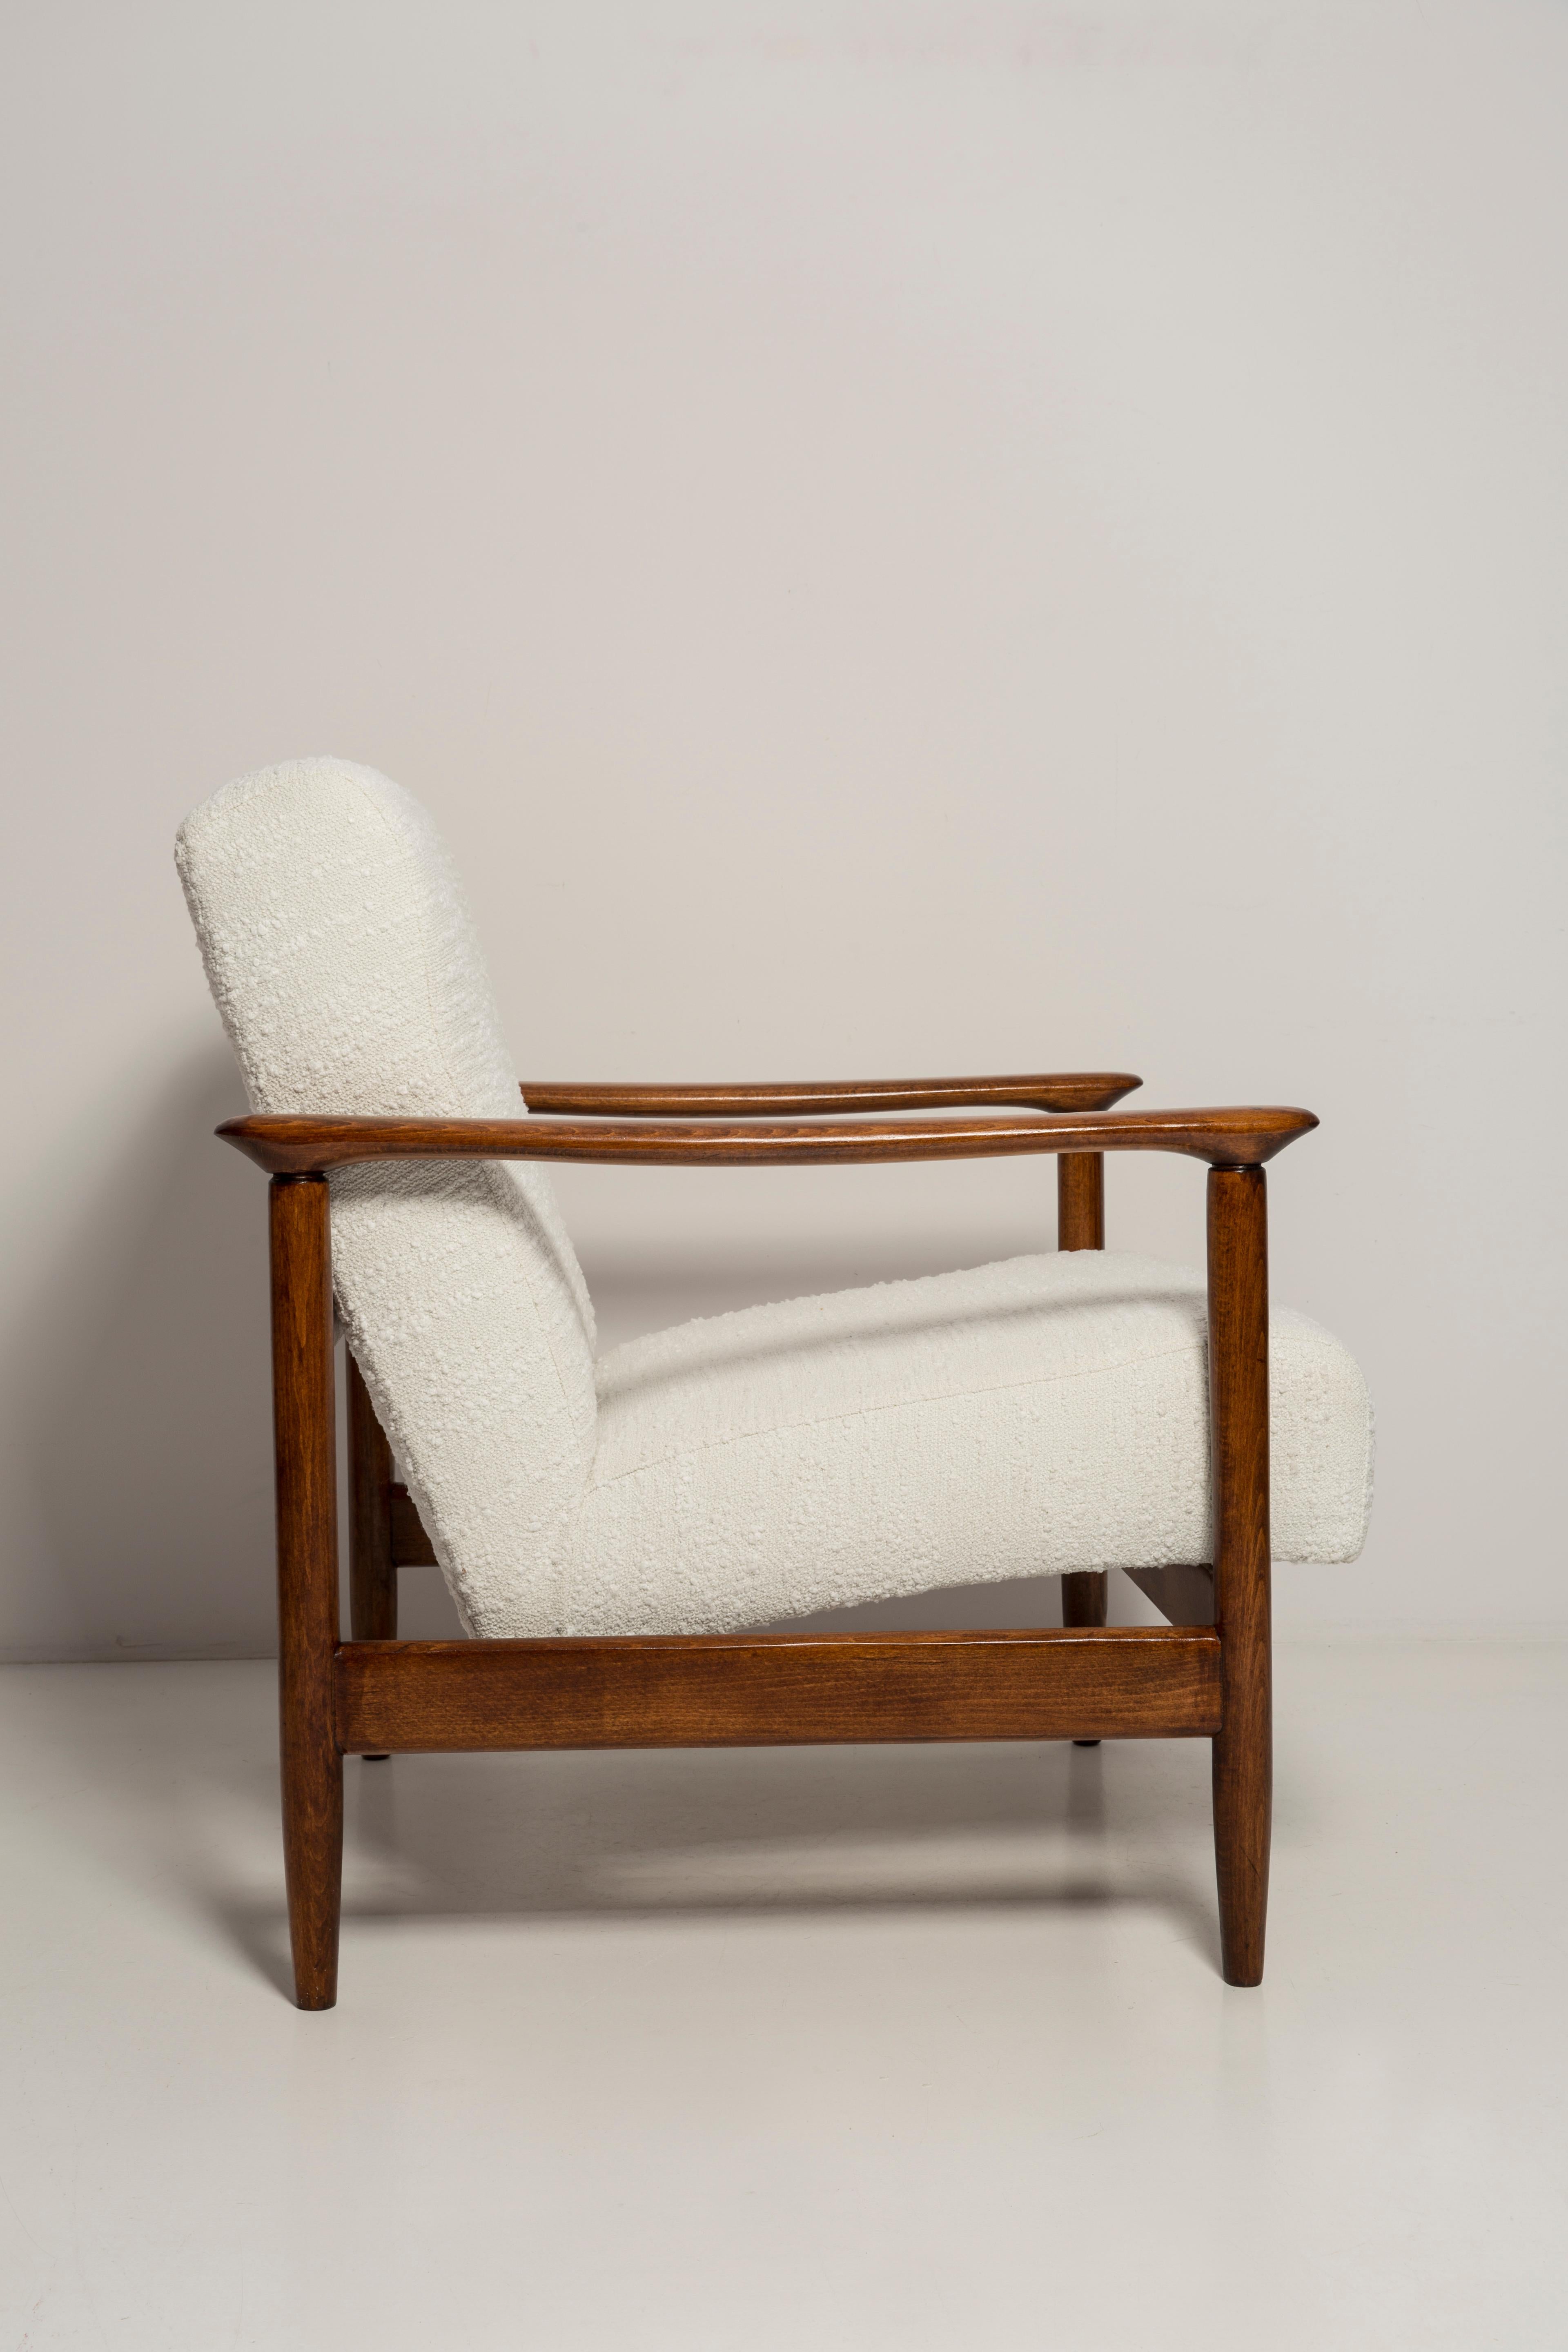 Pair of Mid Century White Boucle Armchairs, GFM 142, Edmund Homa, Europe, 1960s For Sale 2